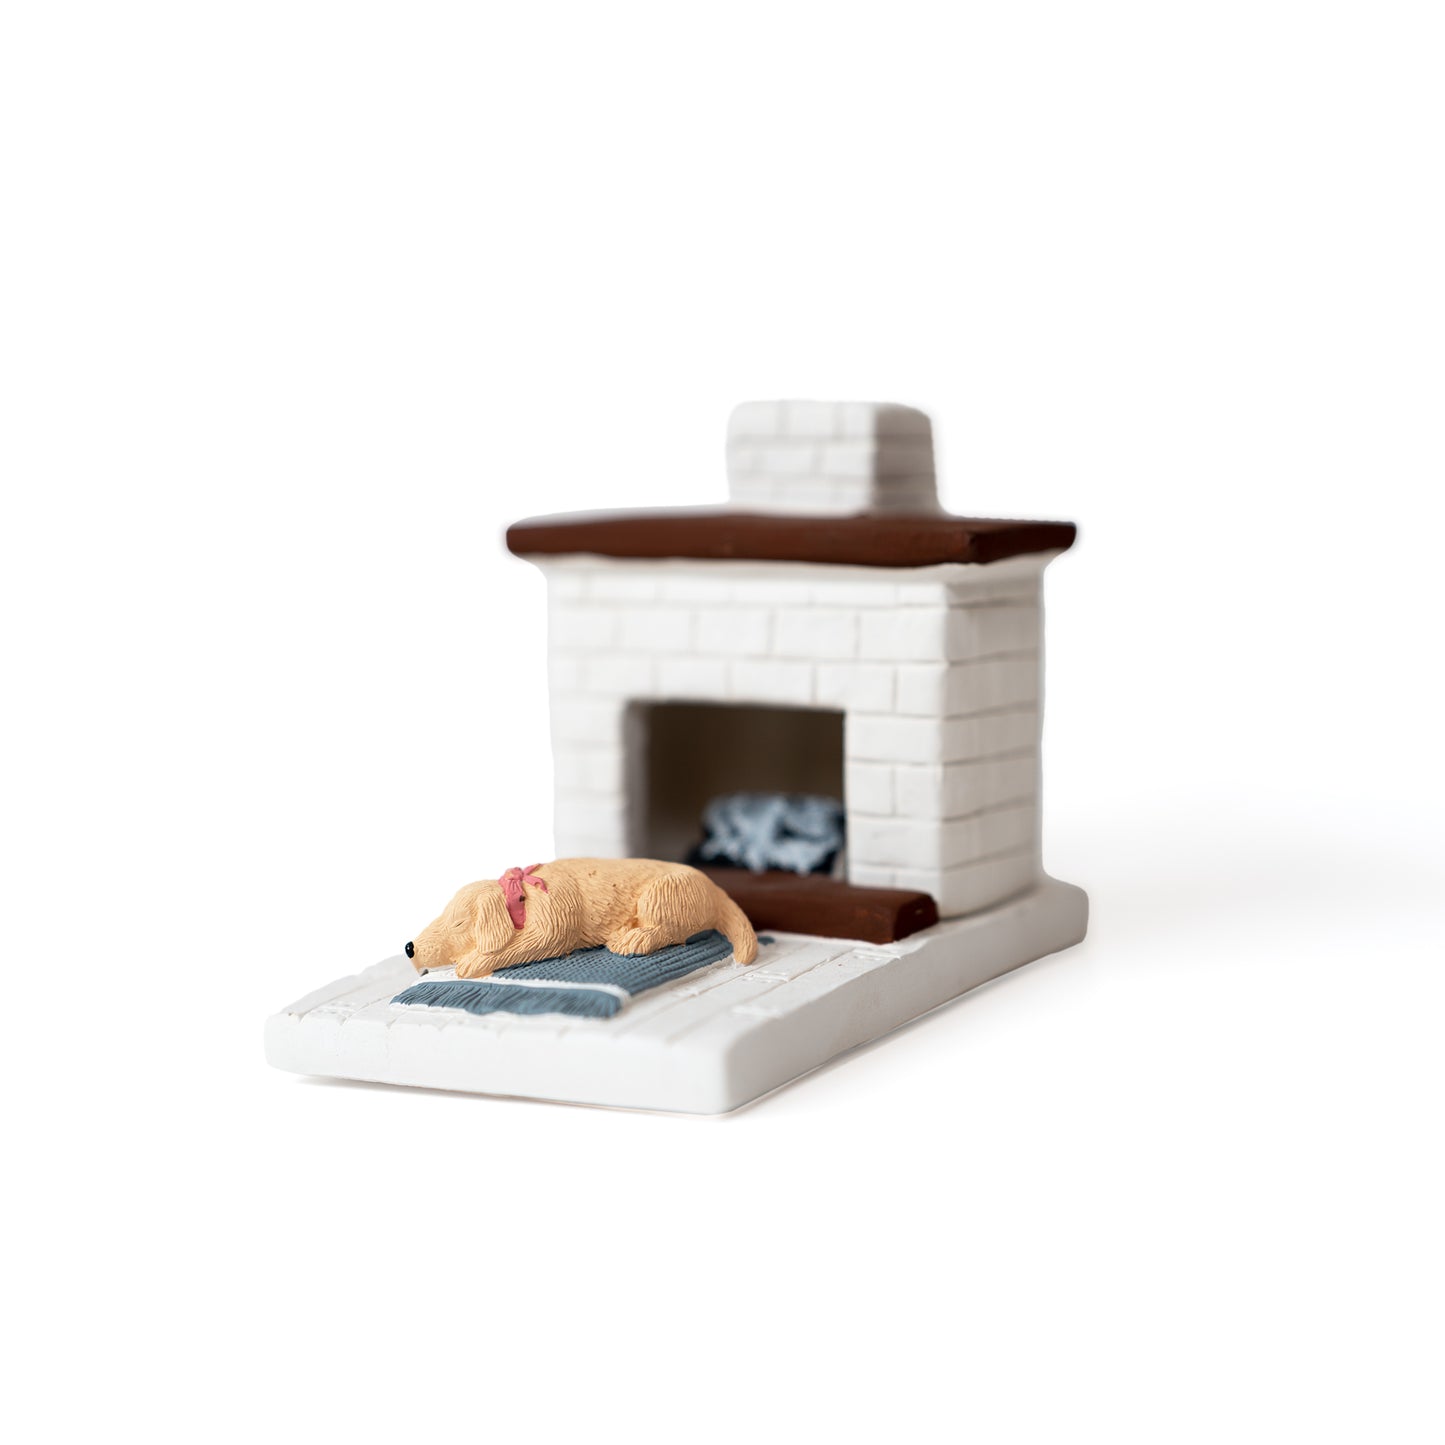 White Country Hearth Puppy with Lab and 20 Count Box of Piñon Incense